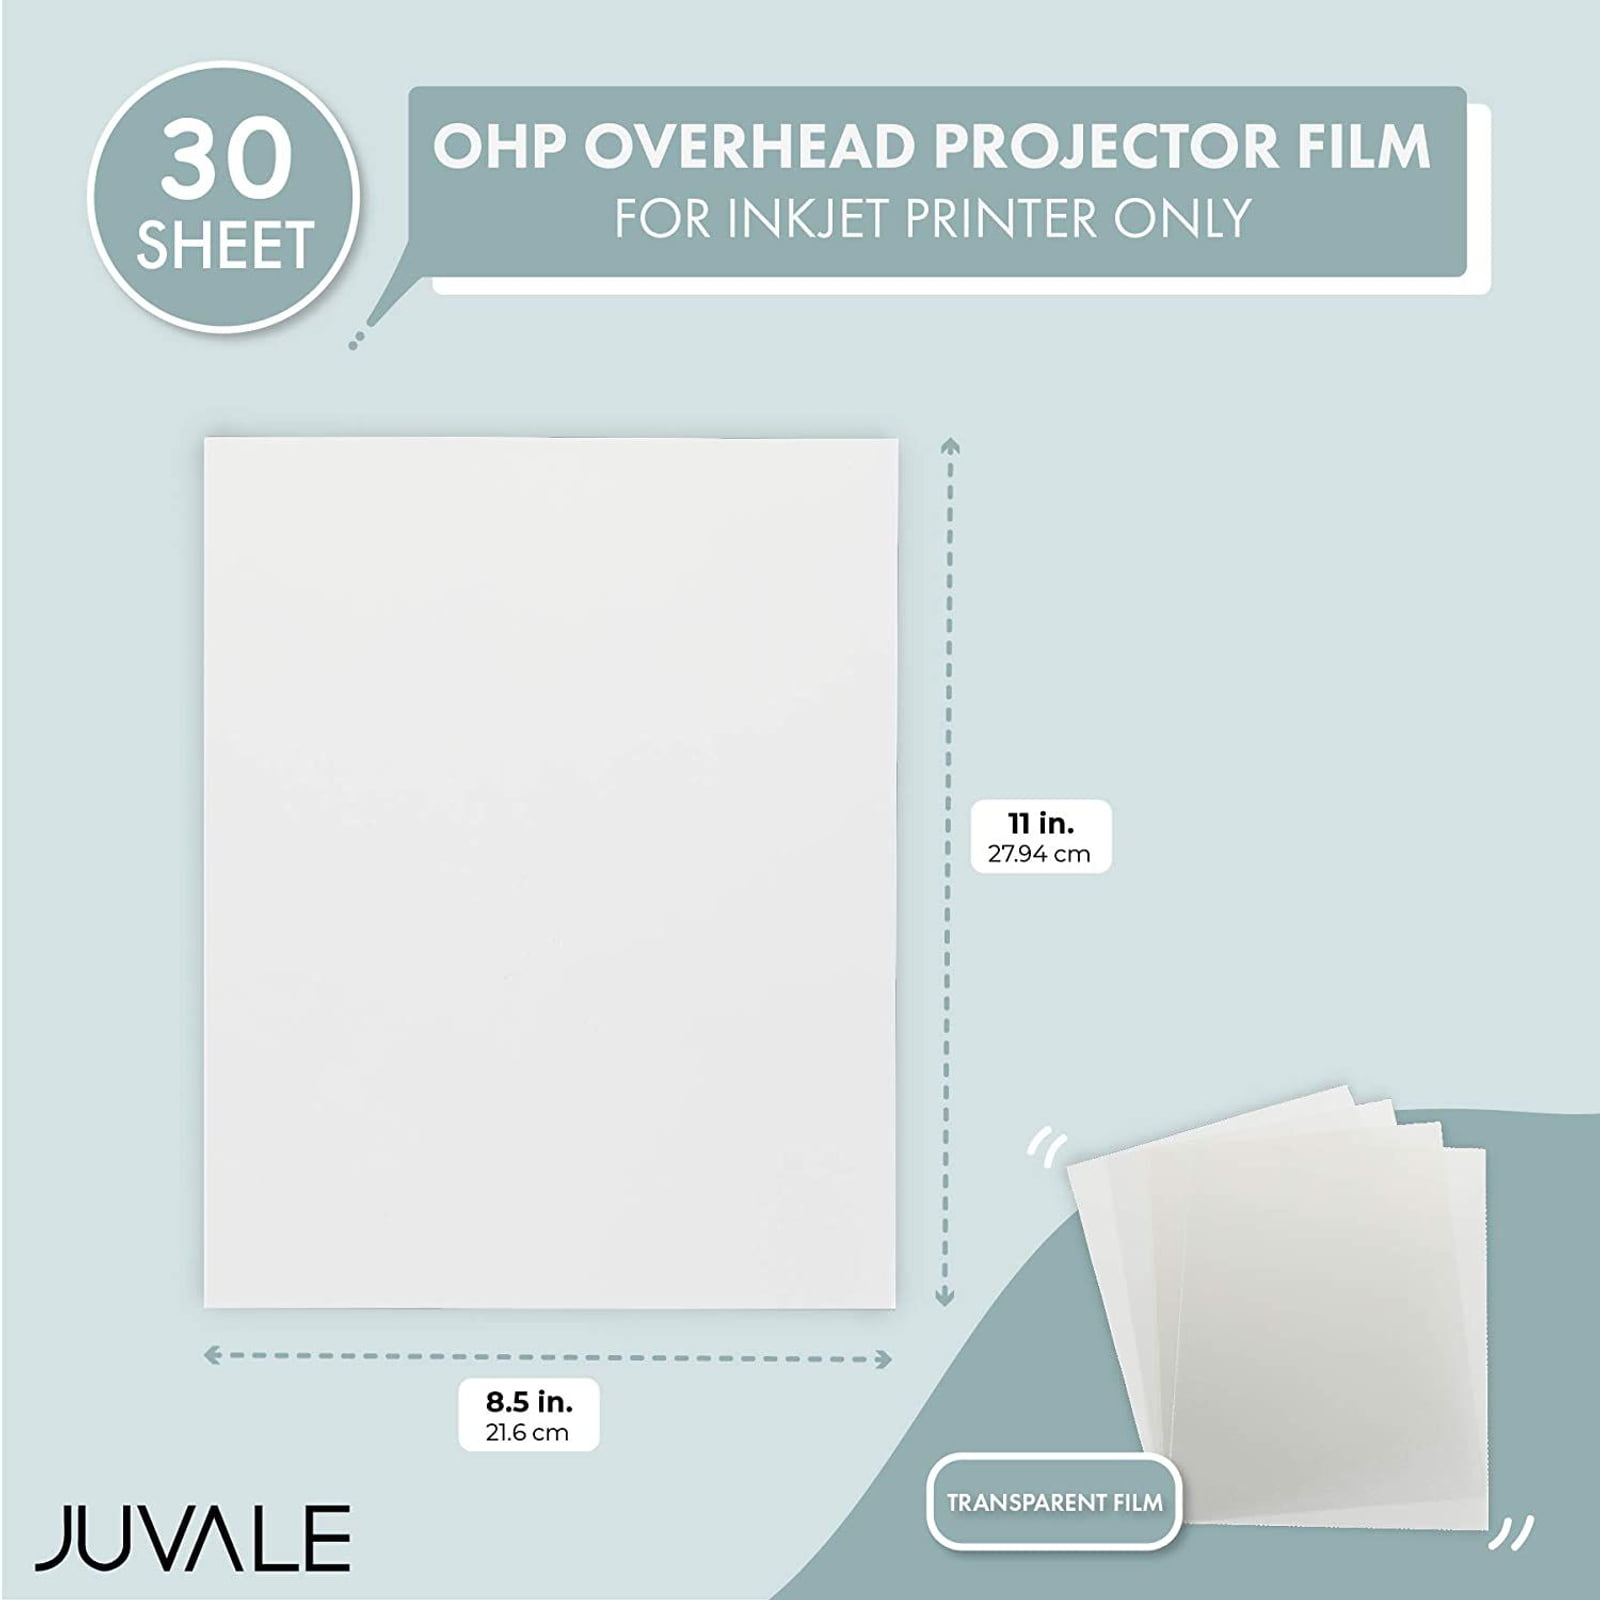 OHP Film Overhead Projector Film 8.5x11" for Inkjet Printer only Transparency 